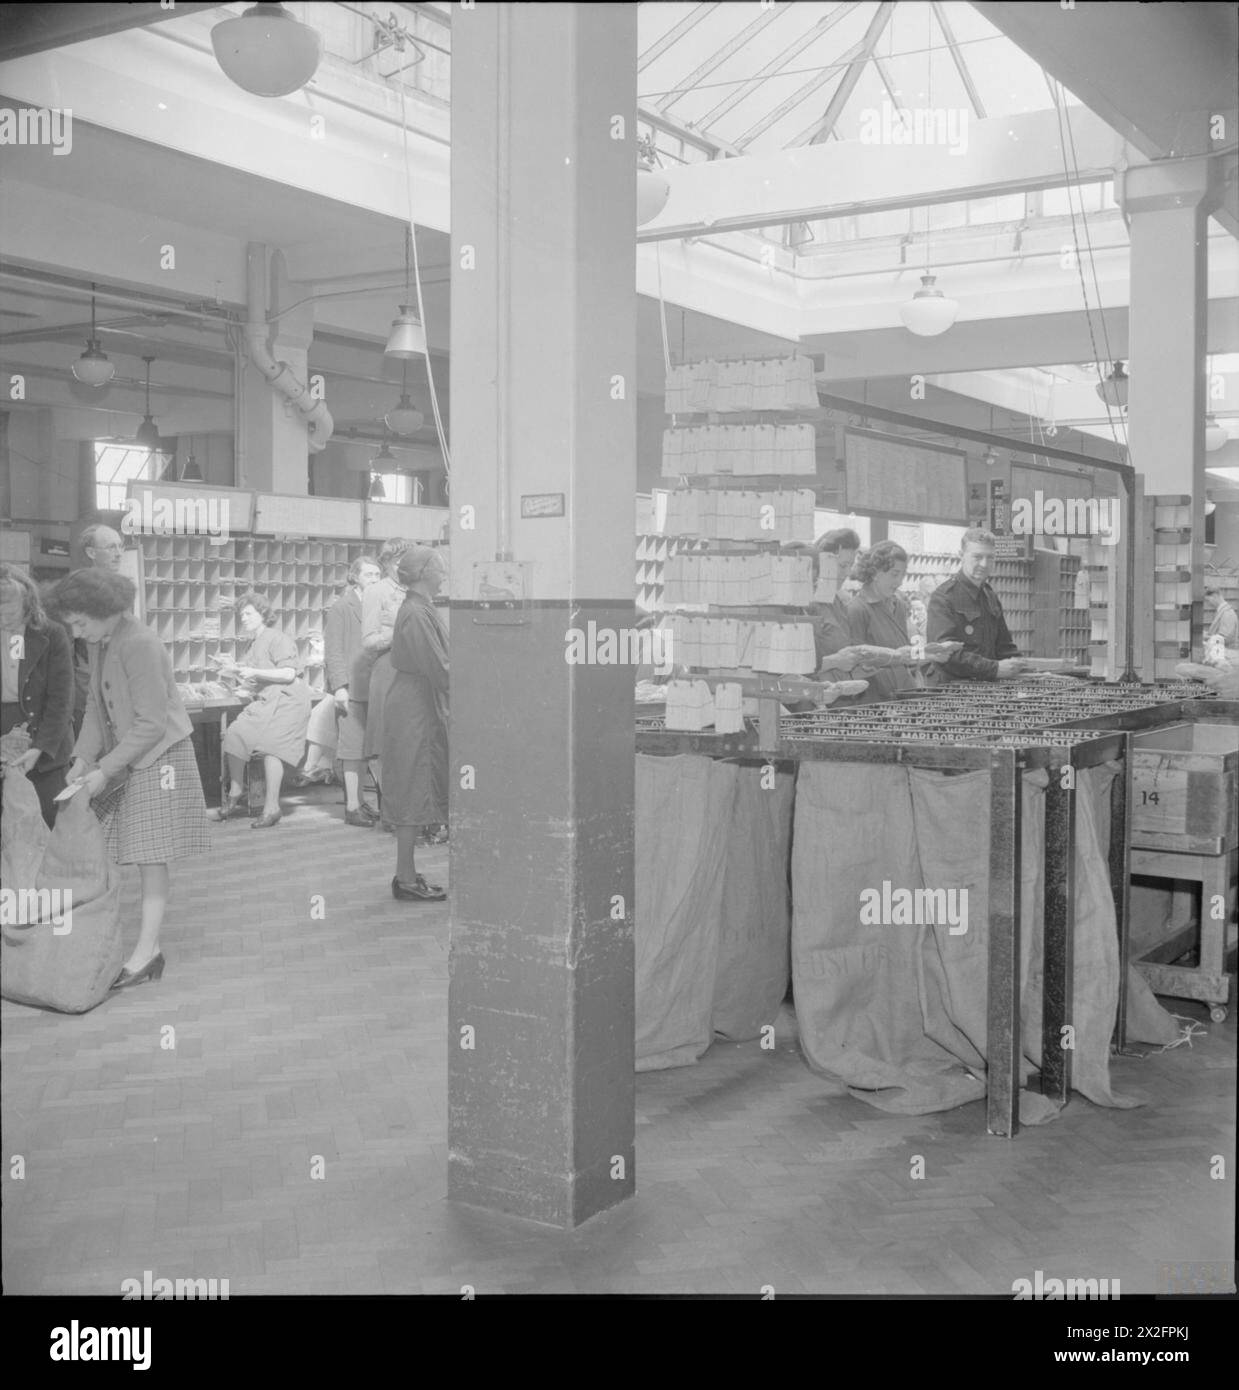 A PICTURE OF A SOUTHERN TOWN: LIFE IN WARTIME READING, BERKSHIRE, ENGLAND, UK, 1945 - A general view of mail sorting in progress at Reading GPO (General Post Office). According to the original caption '654,000 letters and 18,000 parcels are posted per week, 700,000 letters and 20,000 parcels delivered per week; 1,313,000 letters and 101,475 parcels are passed through to other offices' Stock Photo